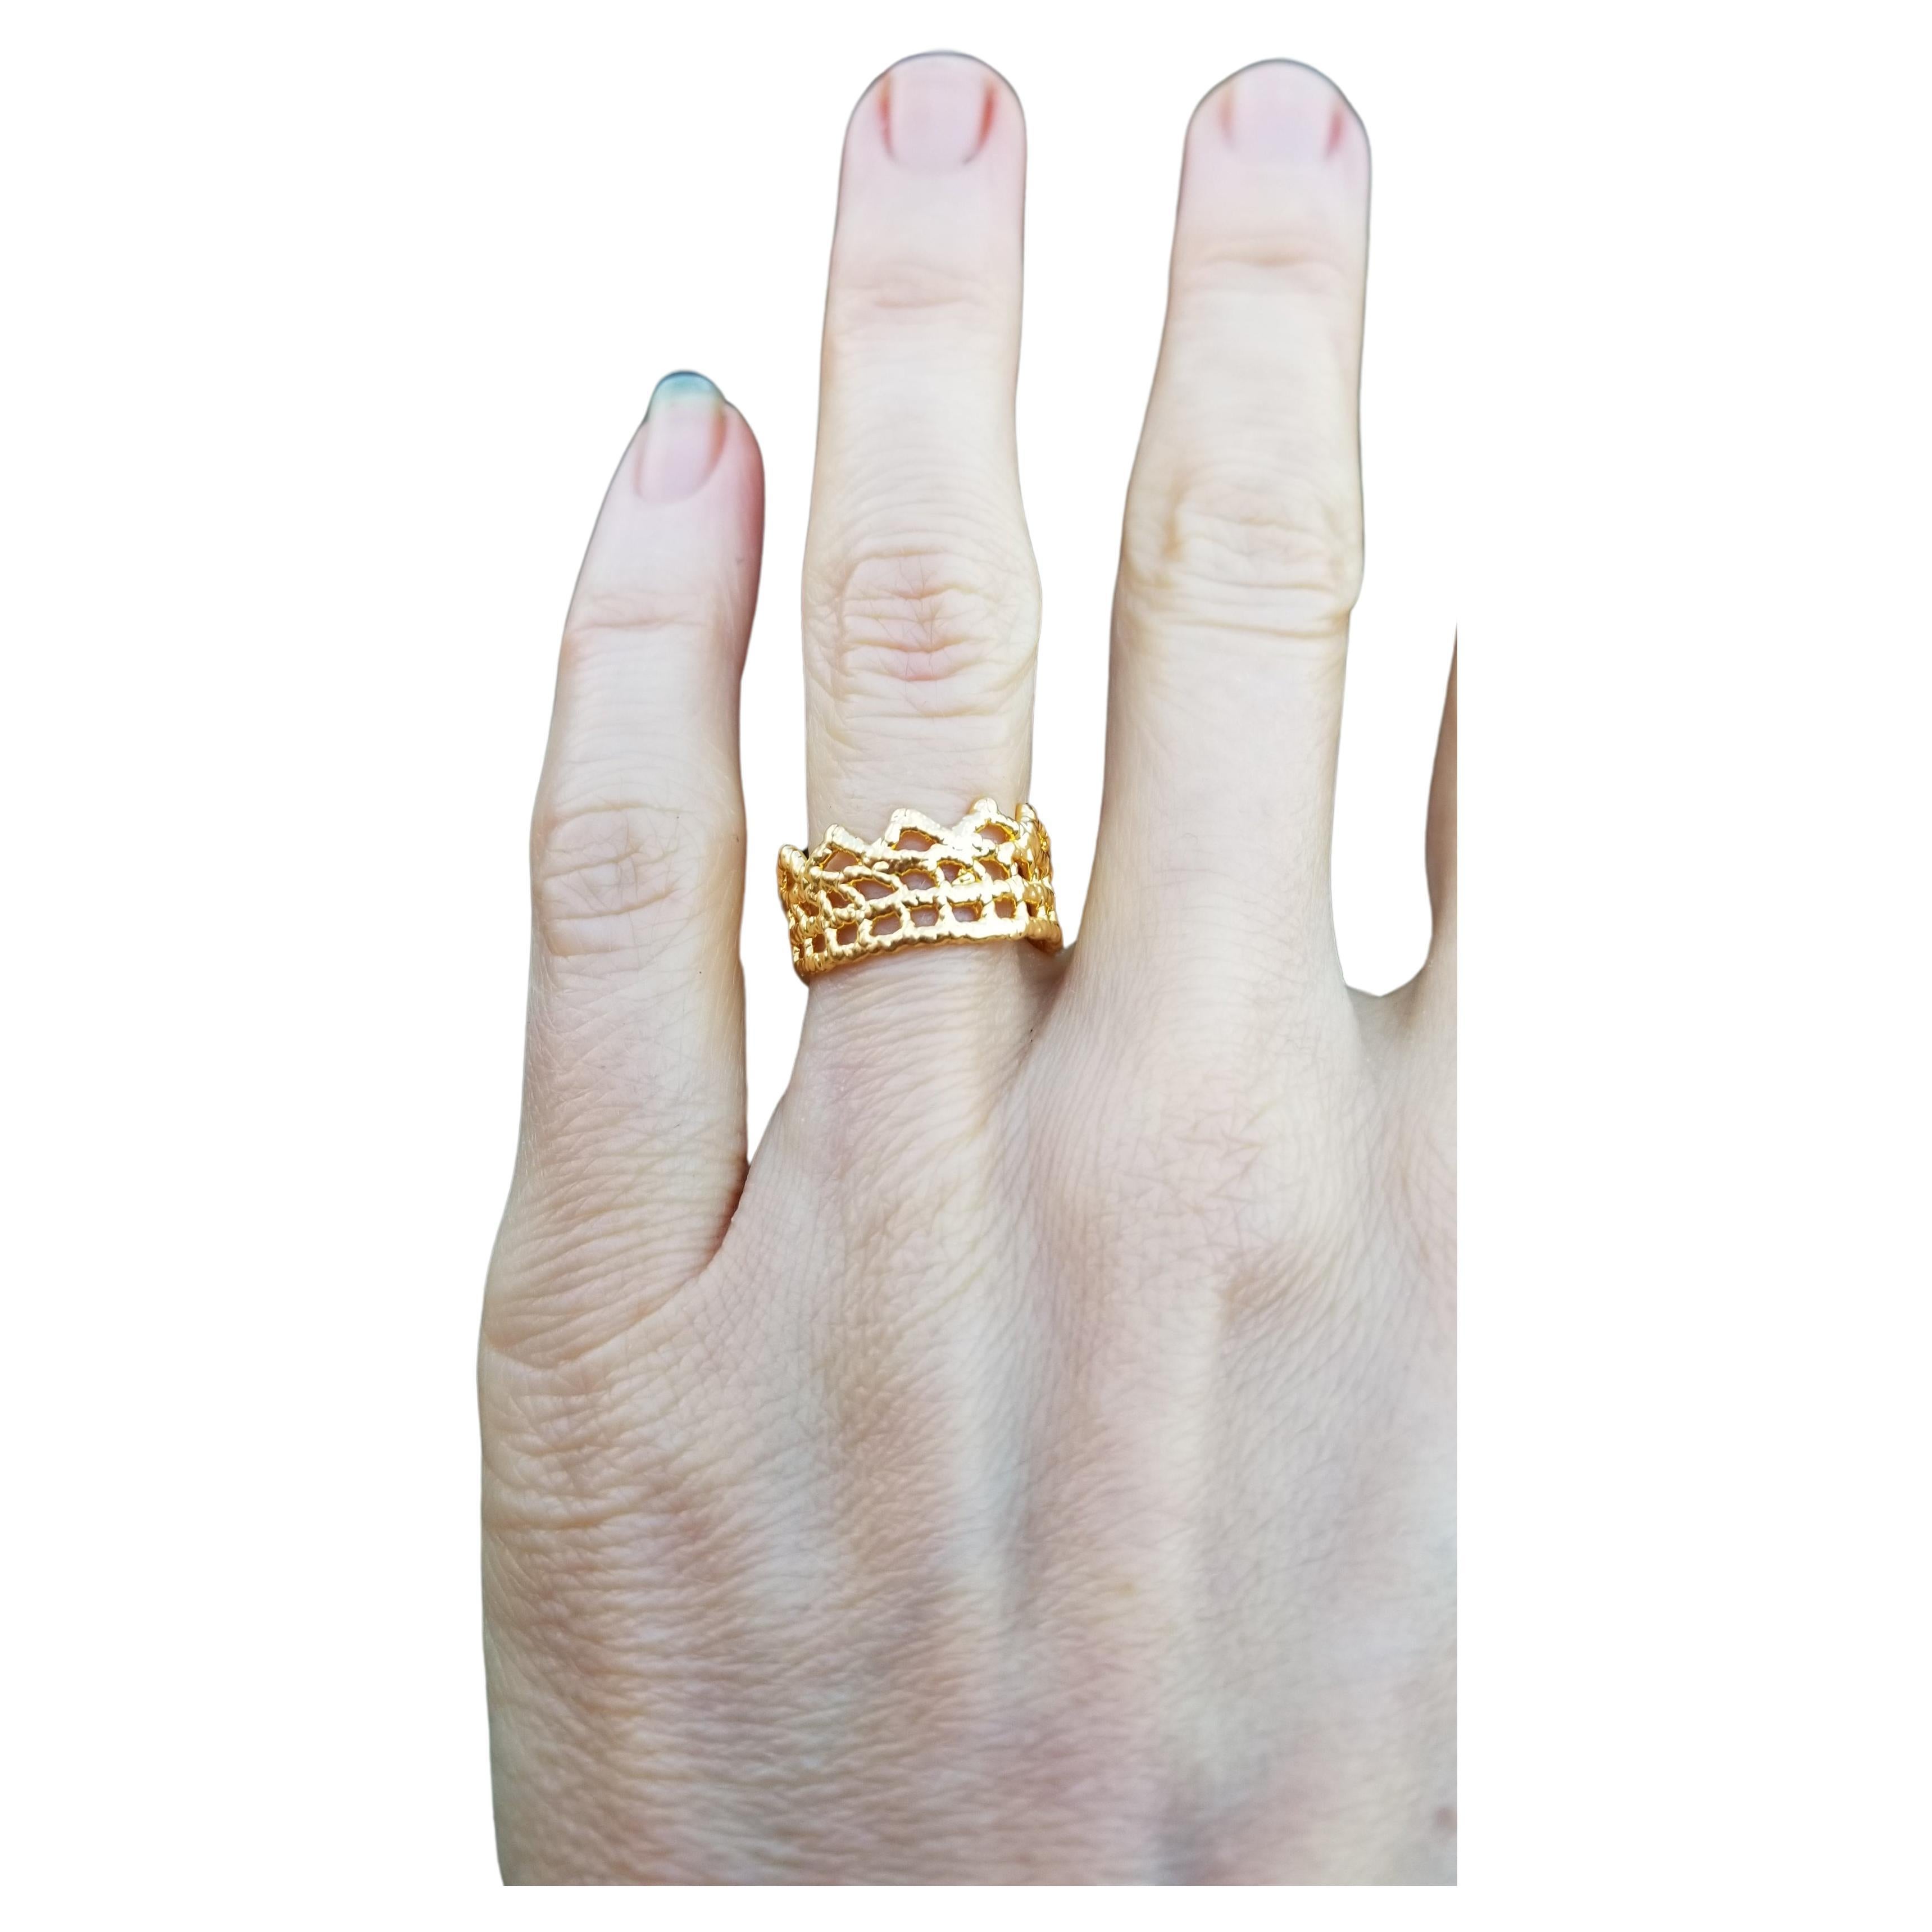 Lace ring dipped in 18k gold For Sale